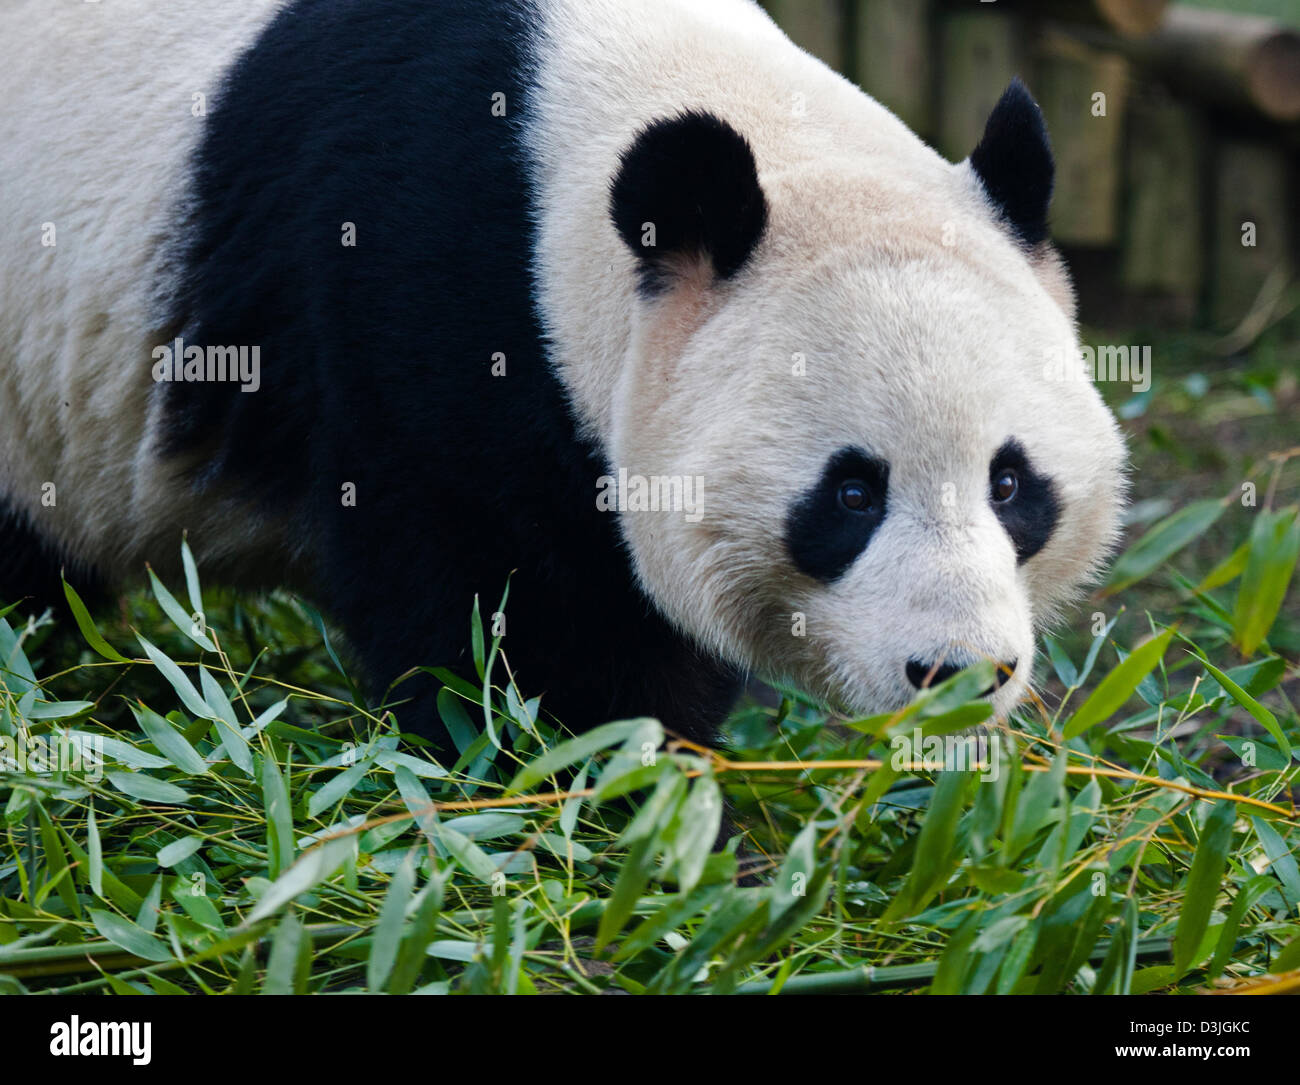 Edinburgh Zoo, Scotland, UK. 20th Feb 2013. Members of the UK Media gather at the enclosure of male panda Yang Guang "Sunshine" while he roams back and forward scent marking, doing hand stands against walls and peering through the closed wire mesh opening which separates him from Tian Tian "Sweetie". According to zoo staff the pair are showing encouraging signs that they are ready to mate and it is hoped that this will occur within the next few weeks. Yang Guang normally eats 35kg of food per day, currently he is eating 50kg mainly bamboo. Stock Photo